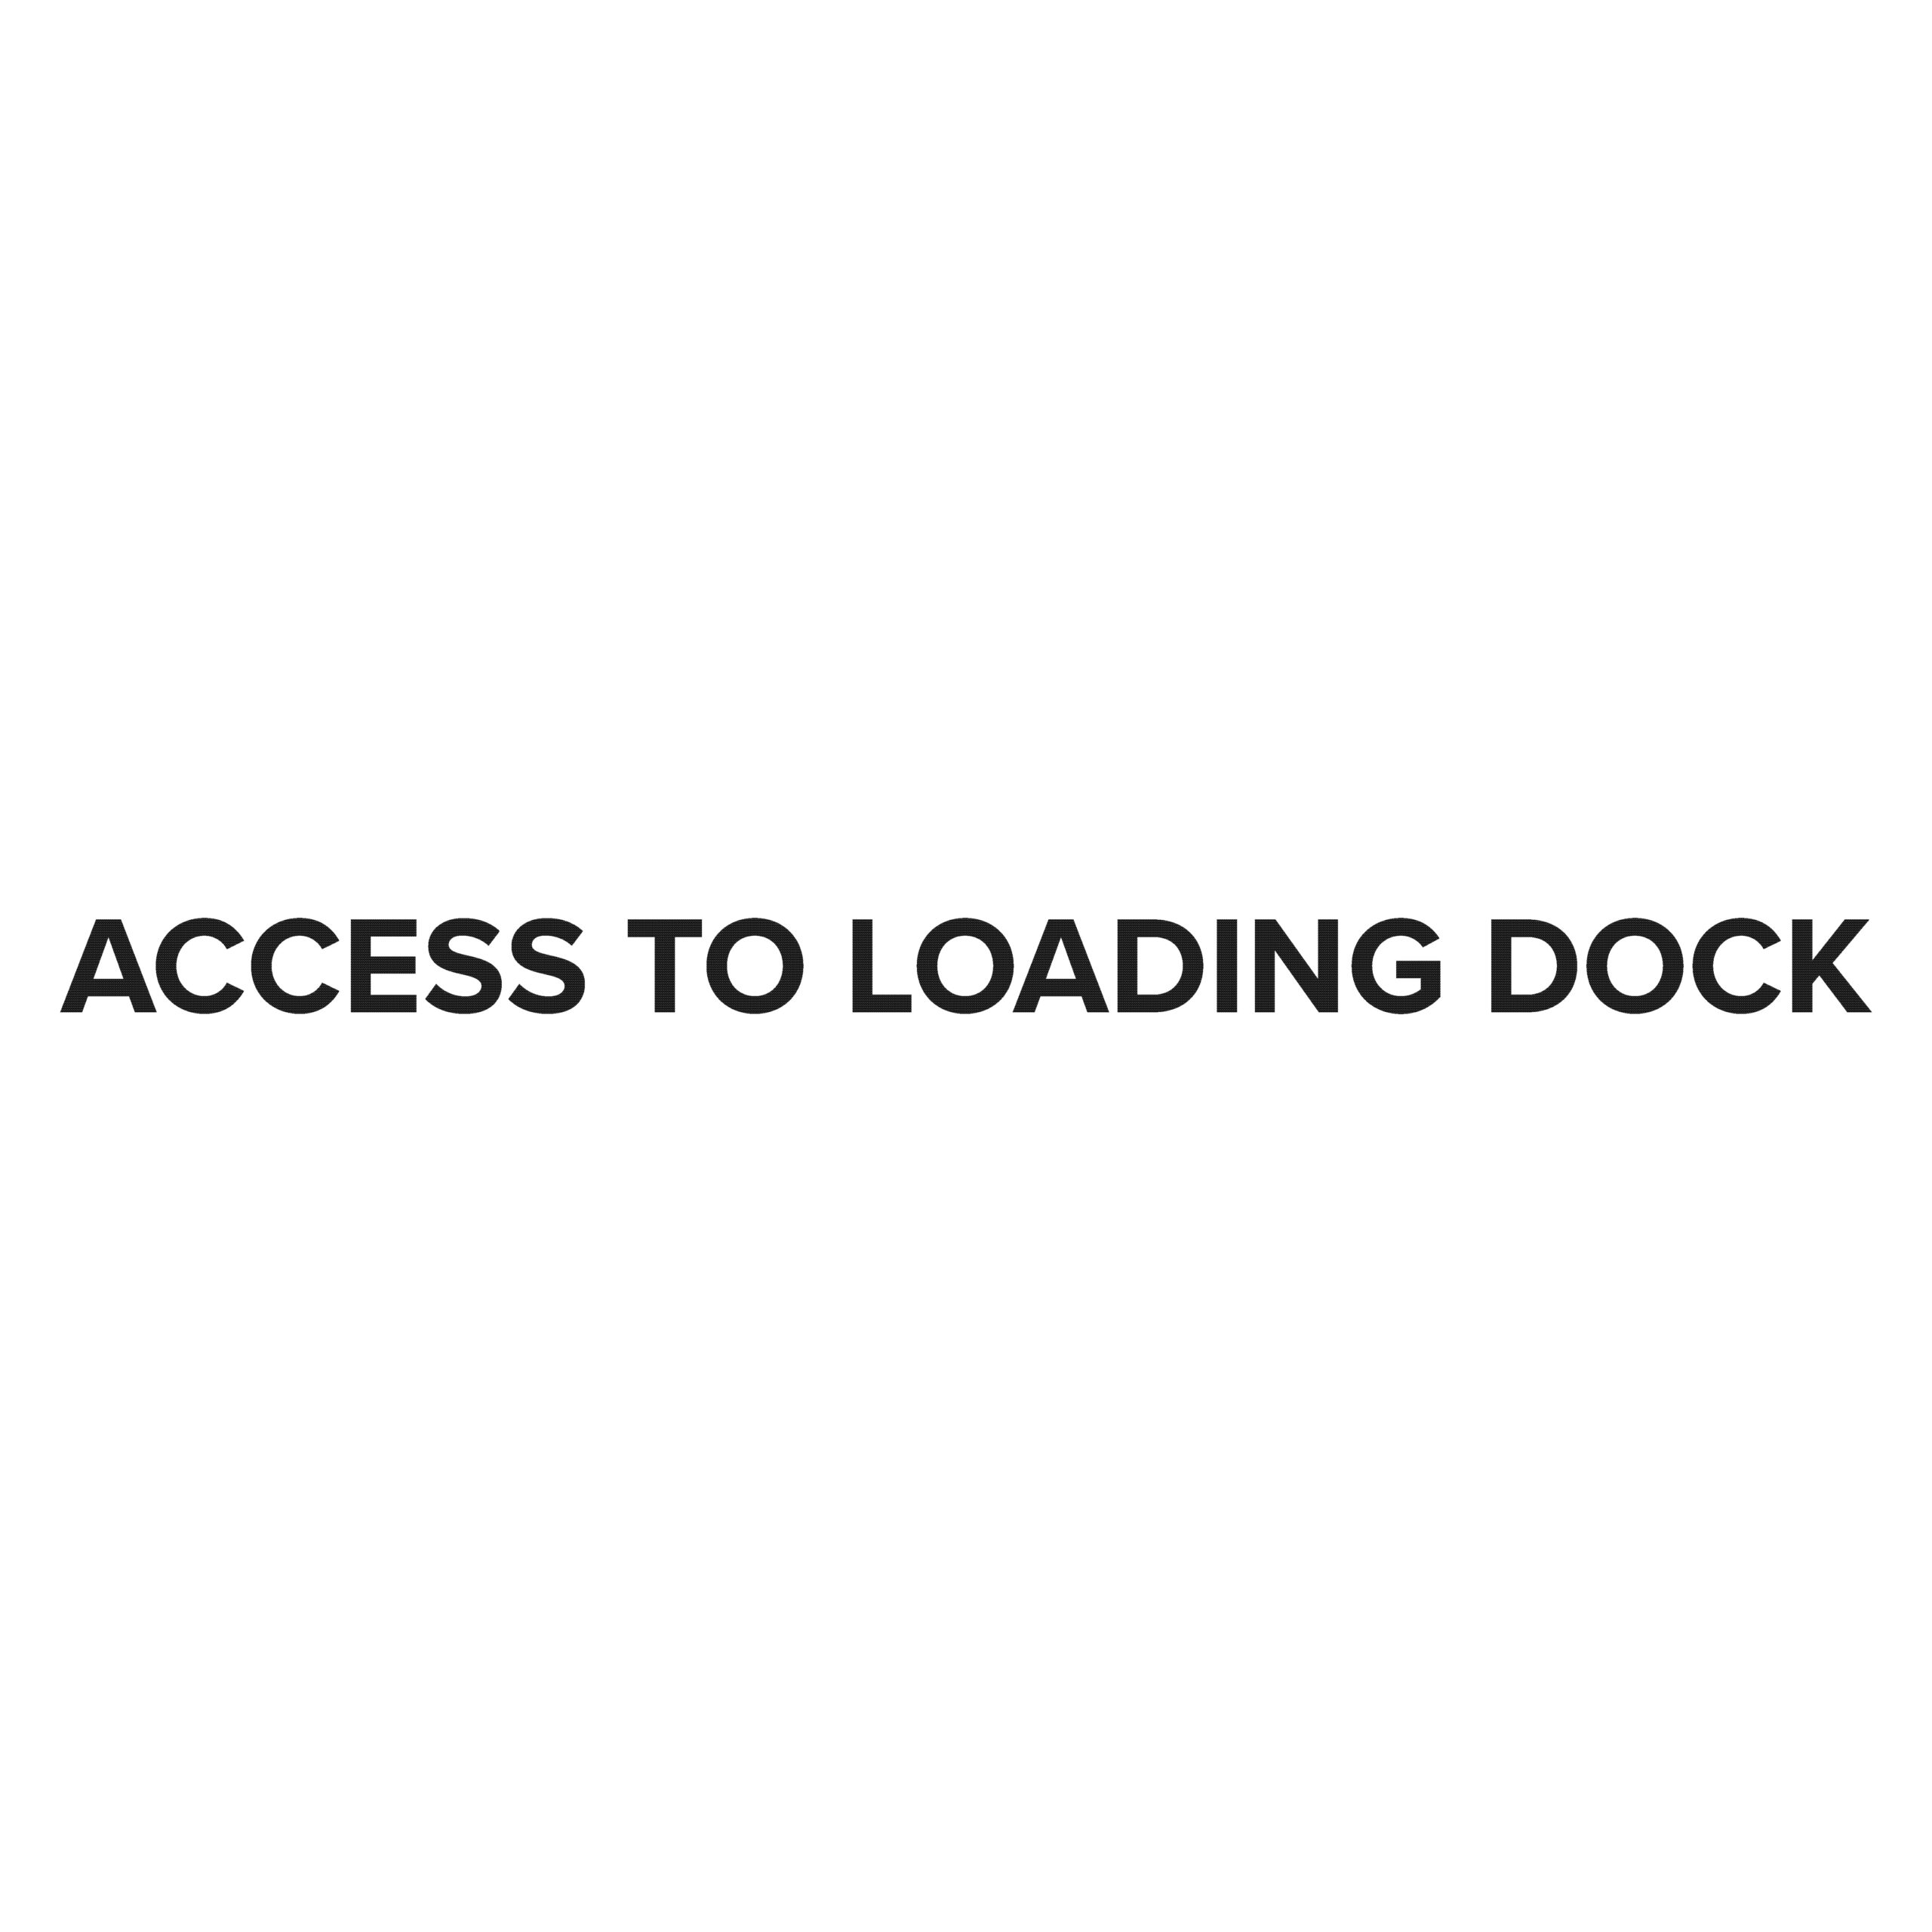 ACCESS TO LOADING DOCK SIGNs scaled